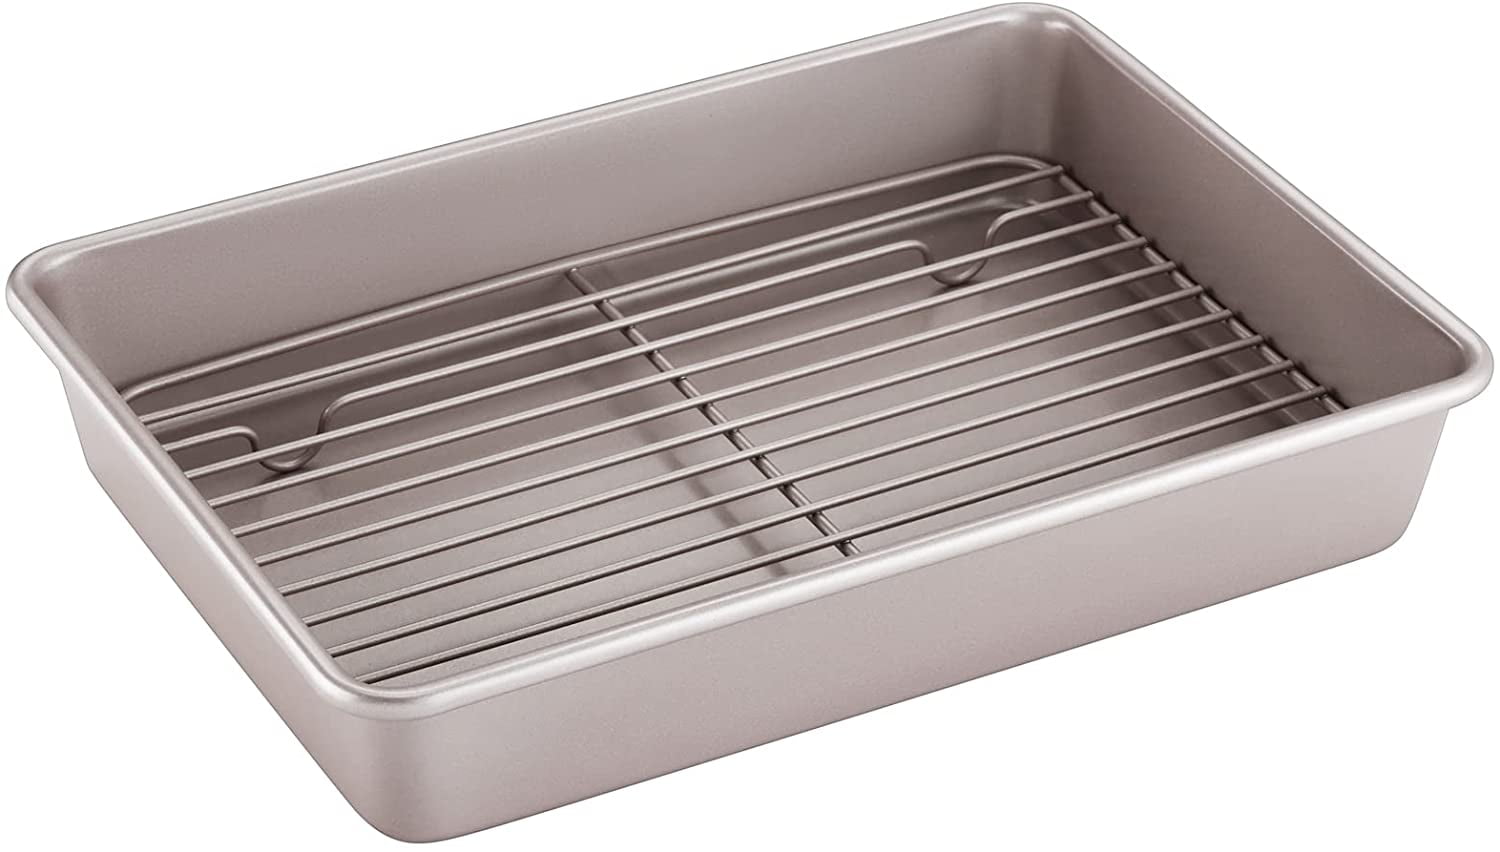 Ovente Oven Roasting Pan 13 x 9.4 Inch Stainless Steel Portable